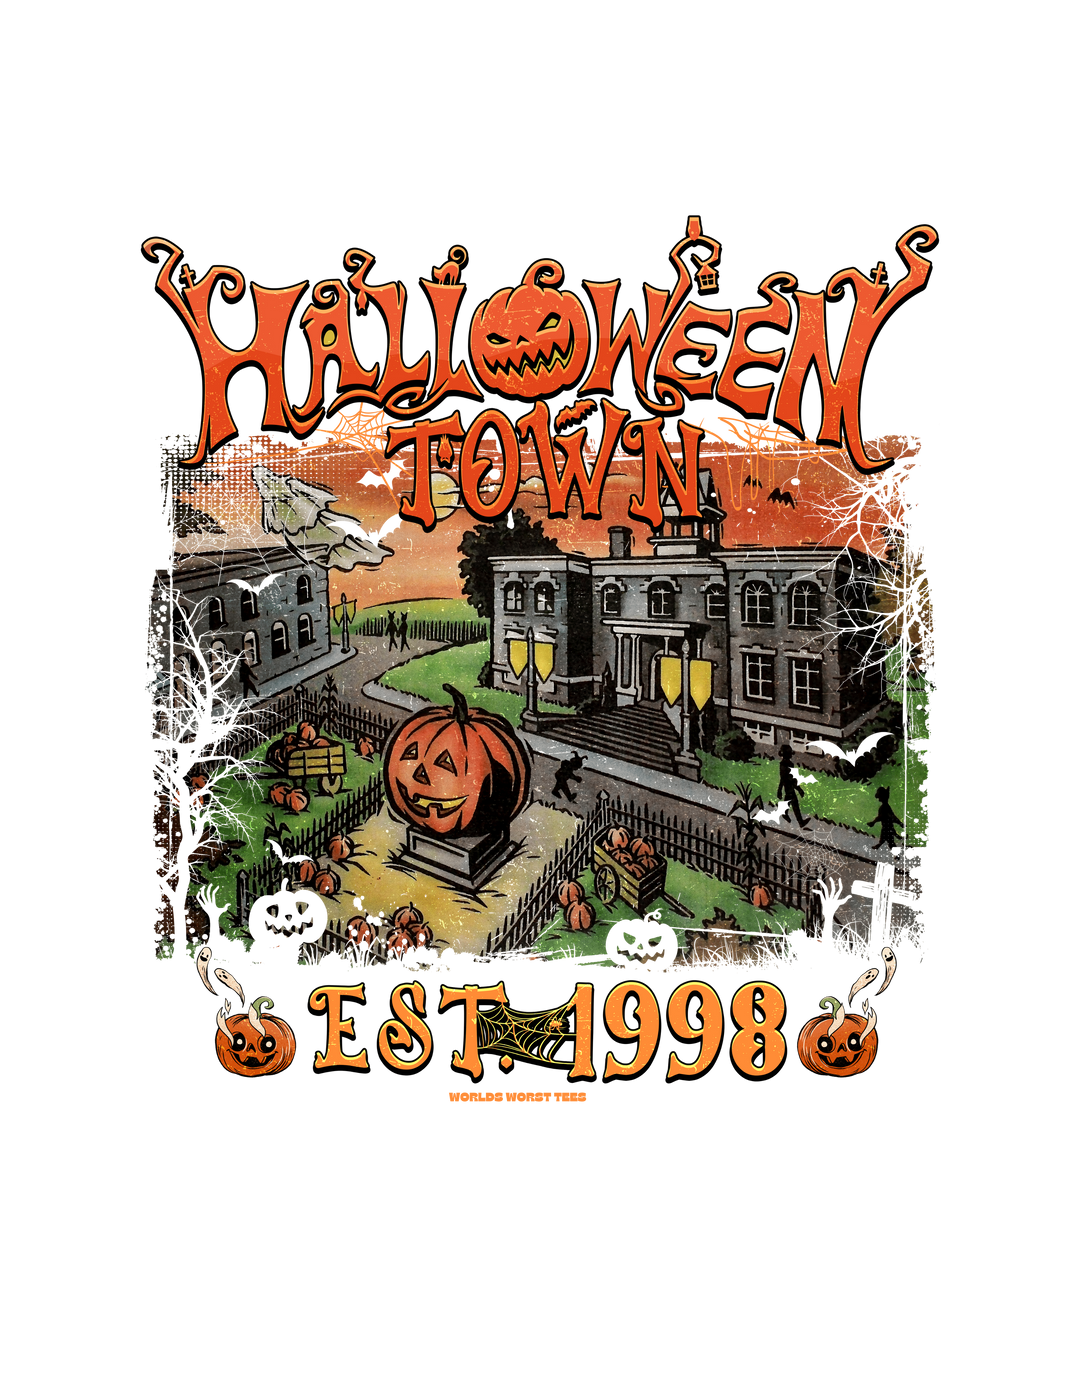 Unisex Halloweentown Crew sweatshirt, featuring a graphic of a spooky town with pumpkins, bats, and a haunted house. Comfortable blend of polyester and cotton, ribbed knit collar, and loose fit.